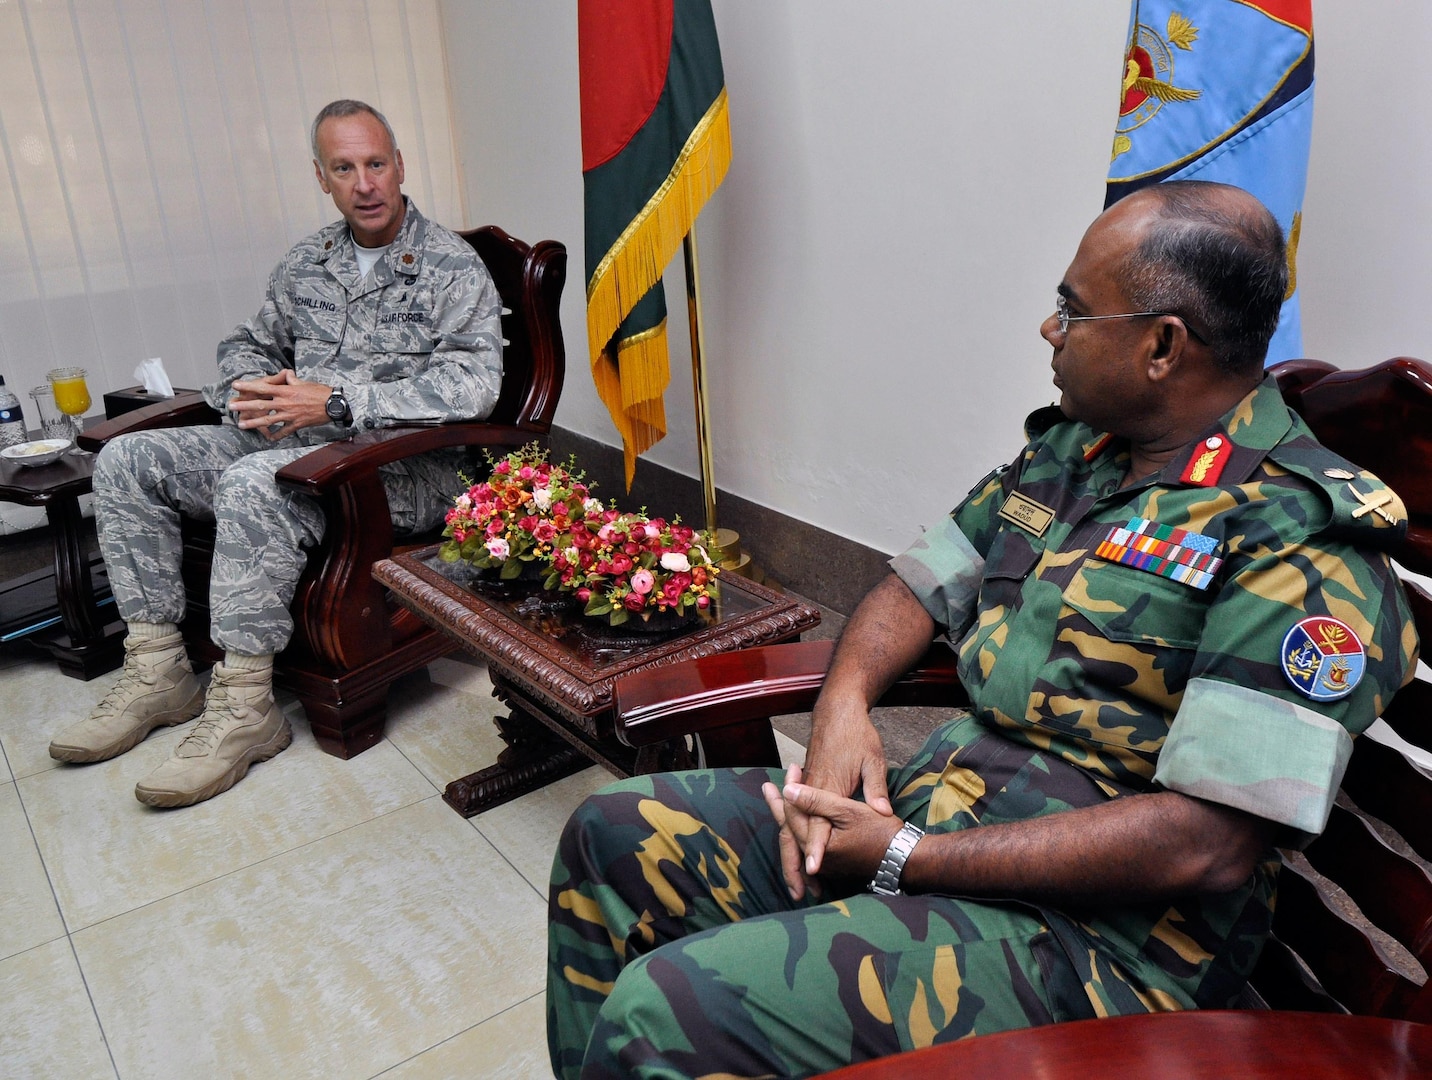 Maj. Dan Schilling, the former director of the Oregon National Guard’s State Partnership Program, meets with Lt. Gen. Mohammed Abdul Wadud, the principle staff officer for the Armed Forces Division of Bangladesh in Dhaka, Aug. 9, 2010.  Schilling and officials from the Portland International Airport met with Bangladeshi transportation officials to discuss security and safety protocols, based on a collaborative work plan developed in April. The group also discussed joint training and information sharing for disaster response, humanitarian aid, and training exercises as part of an overall SPP strategic plan.